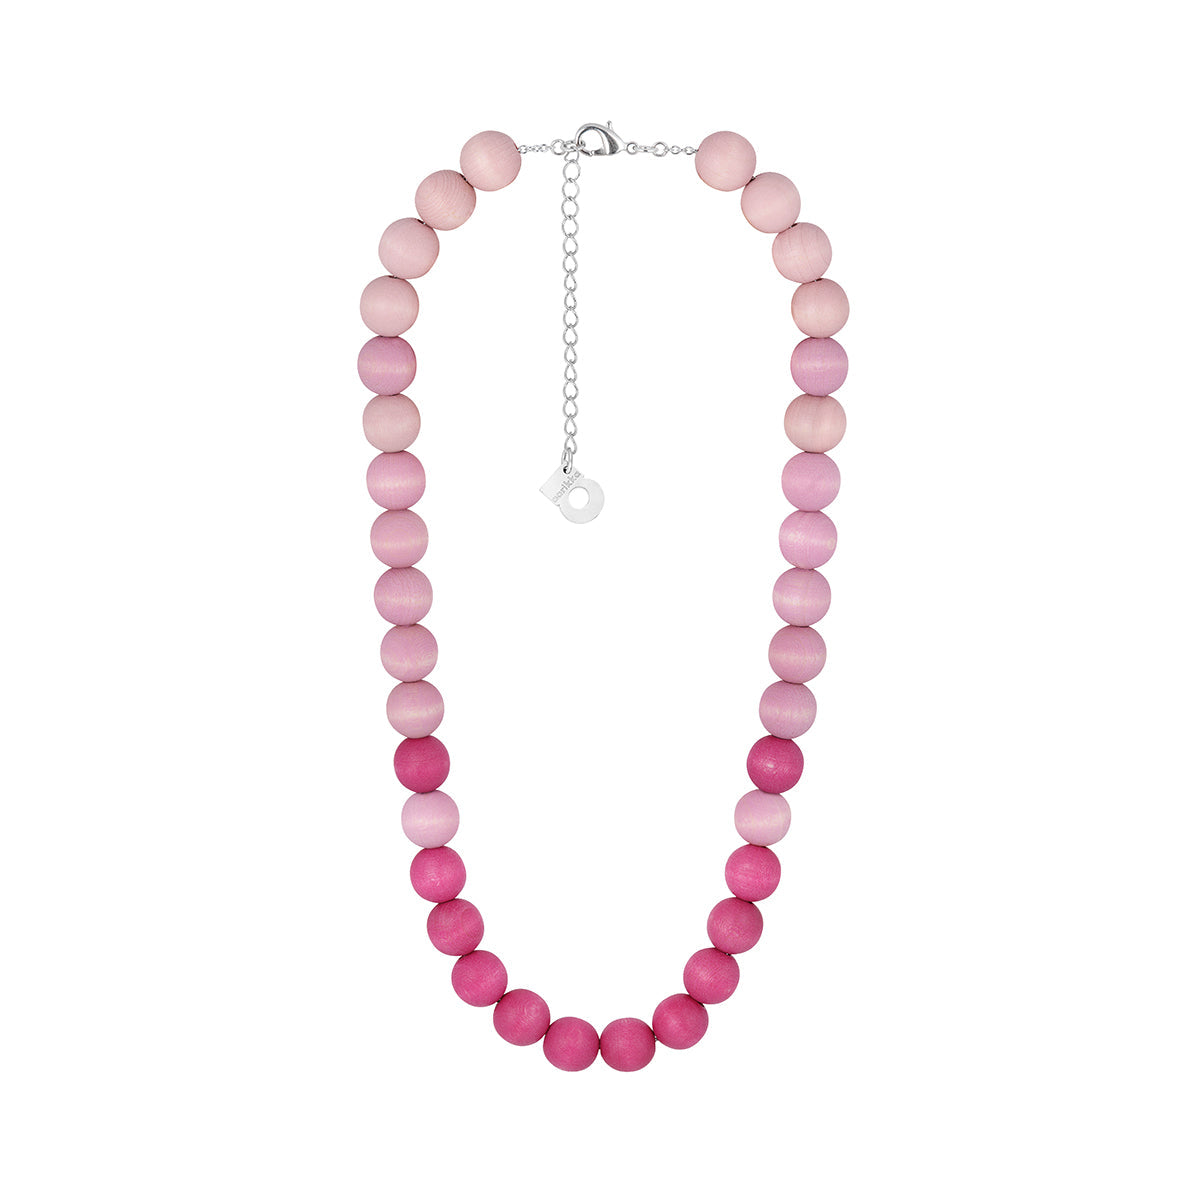 Aito necklace, shades of pink